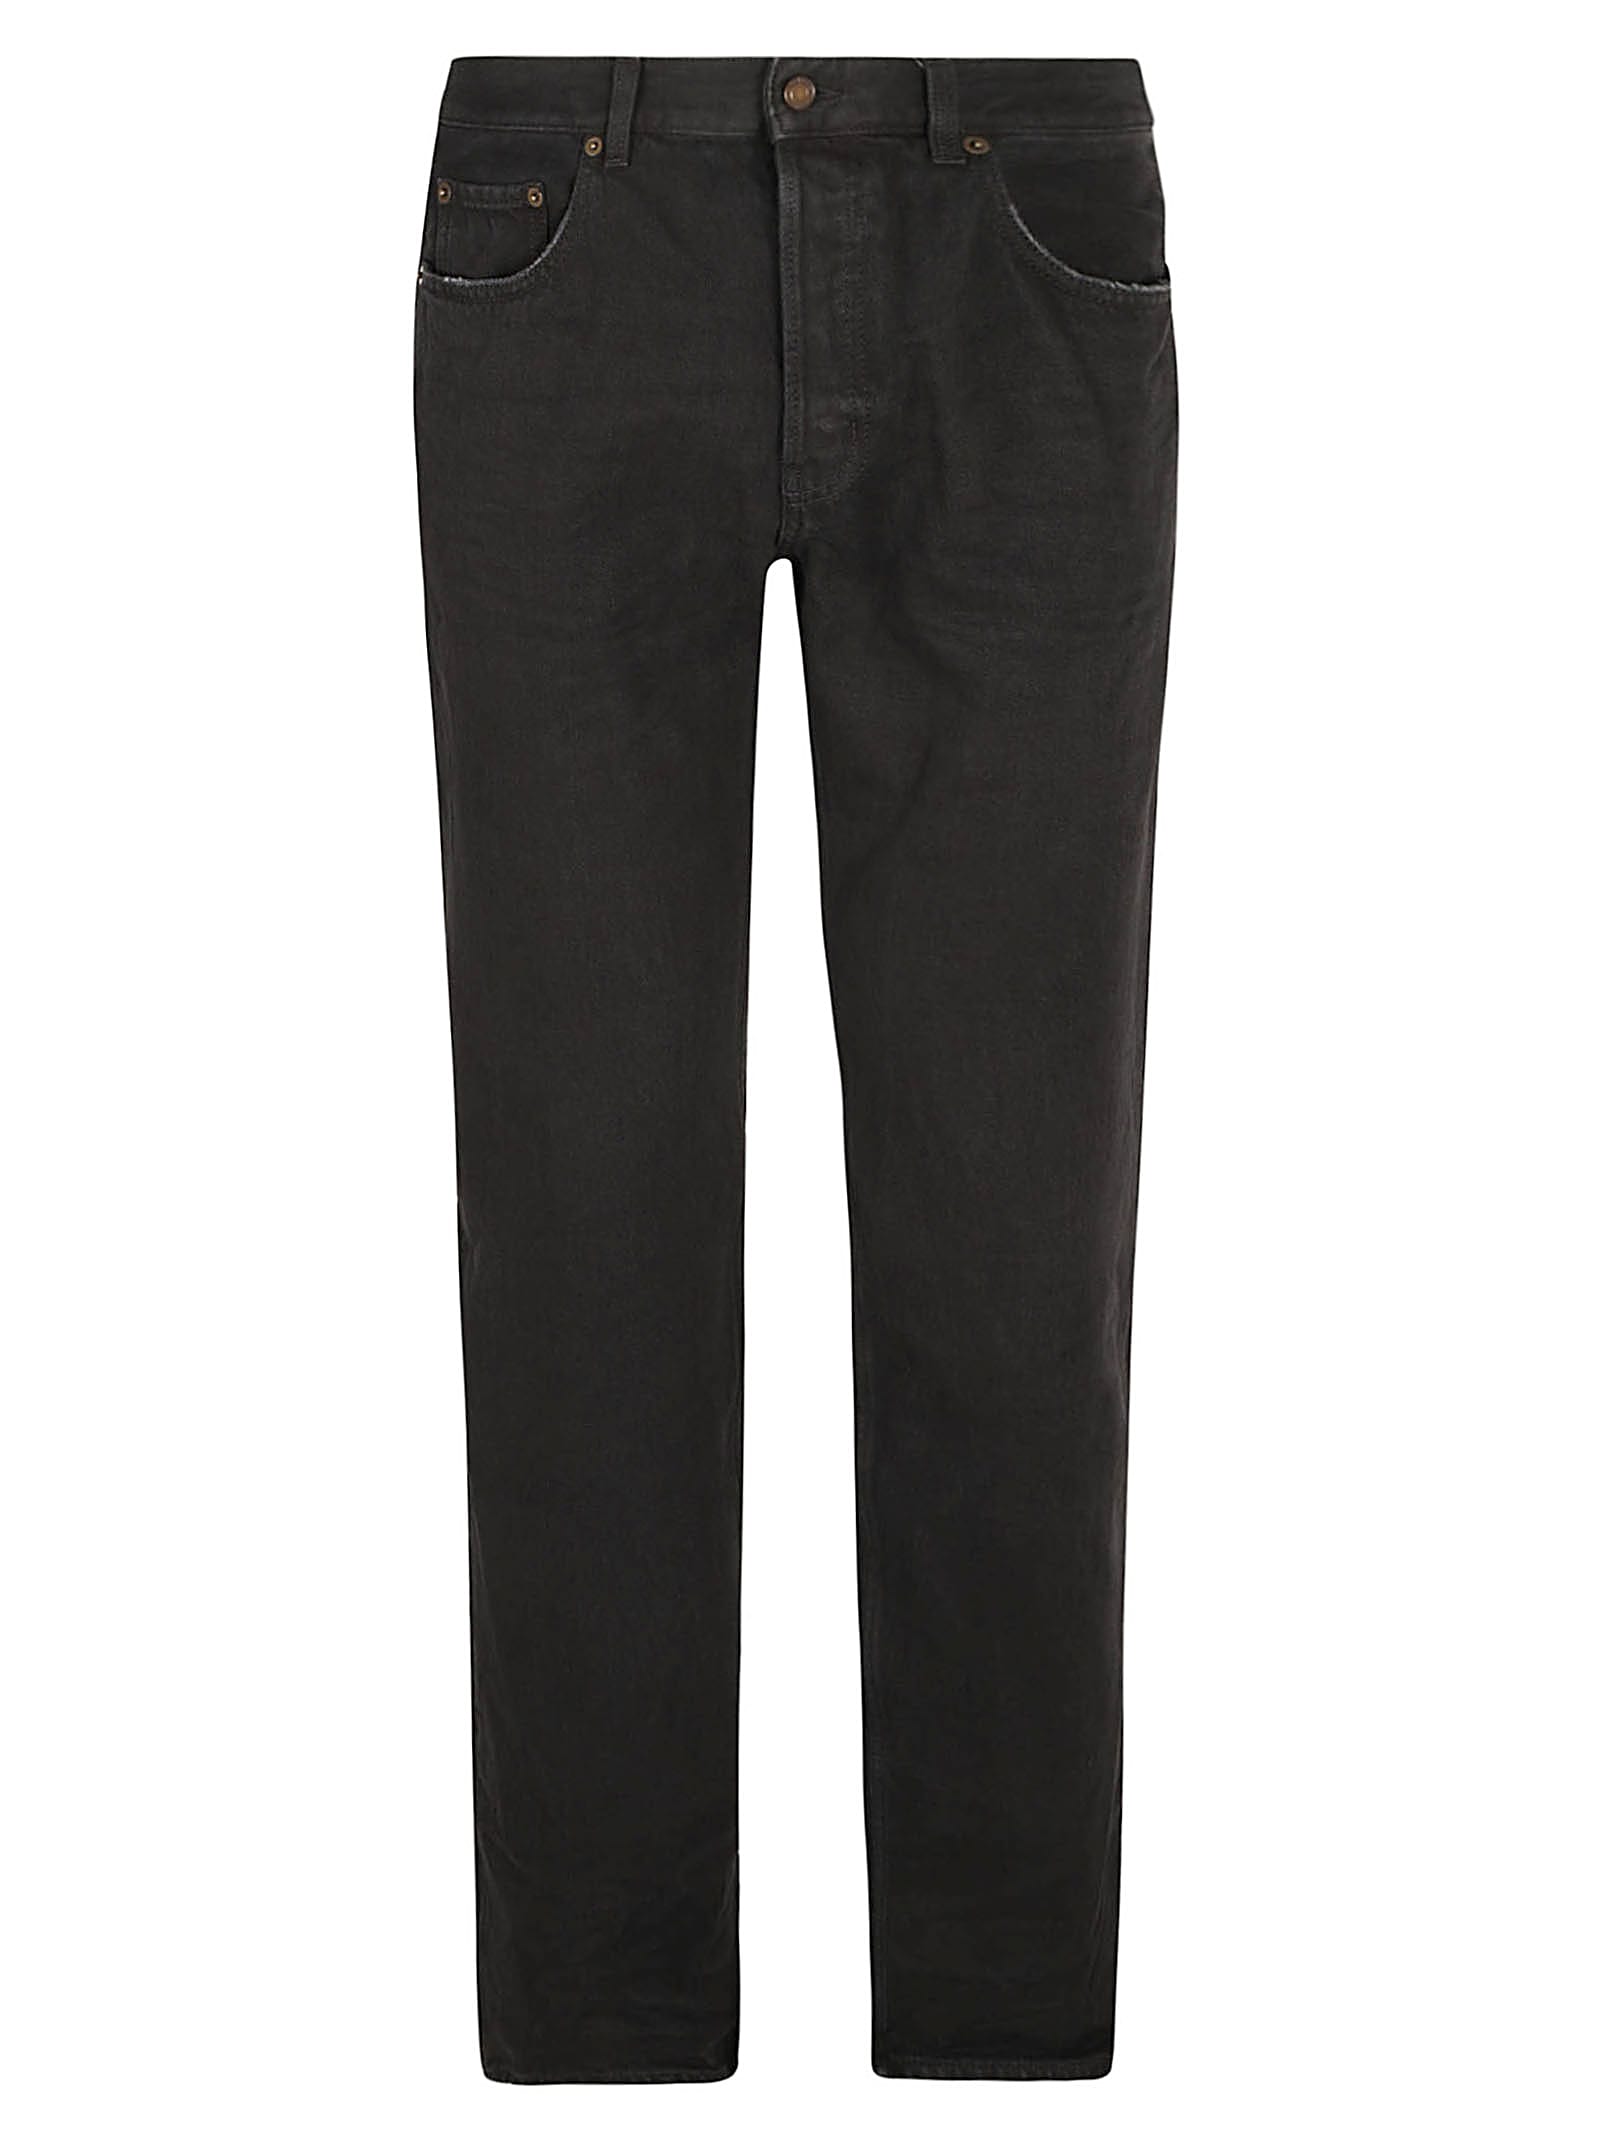 Saint Laurent Fitted Buttoned Classic Jeans In Neo Carbon Black